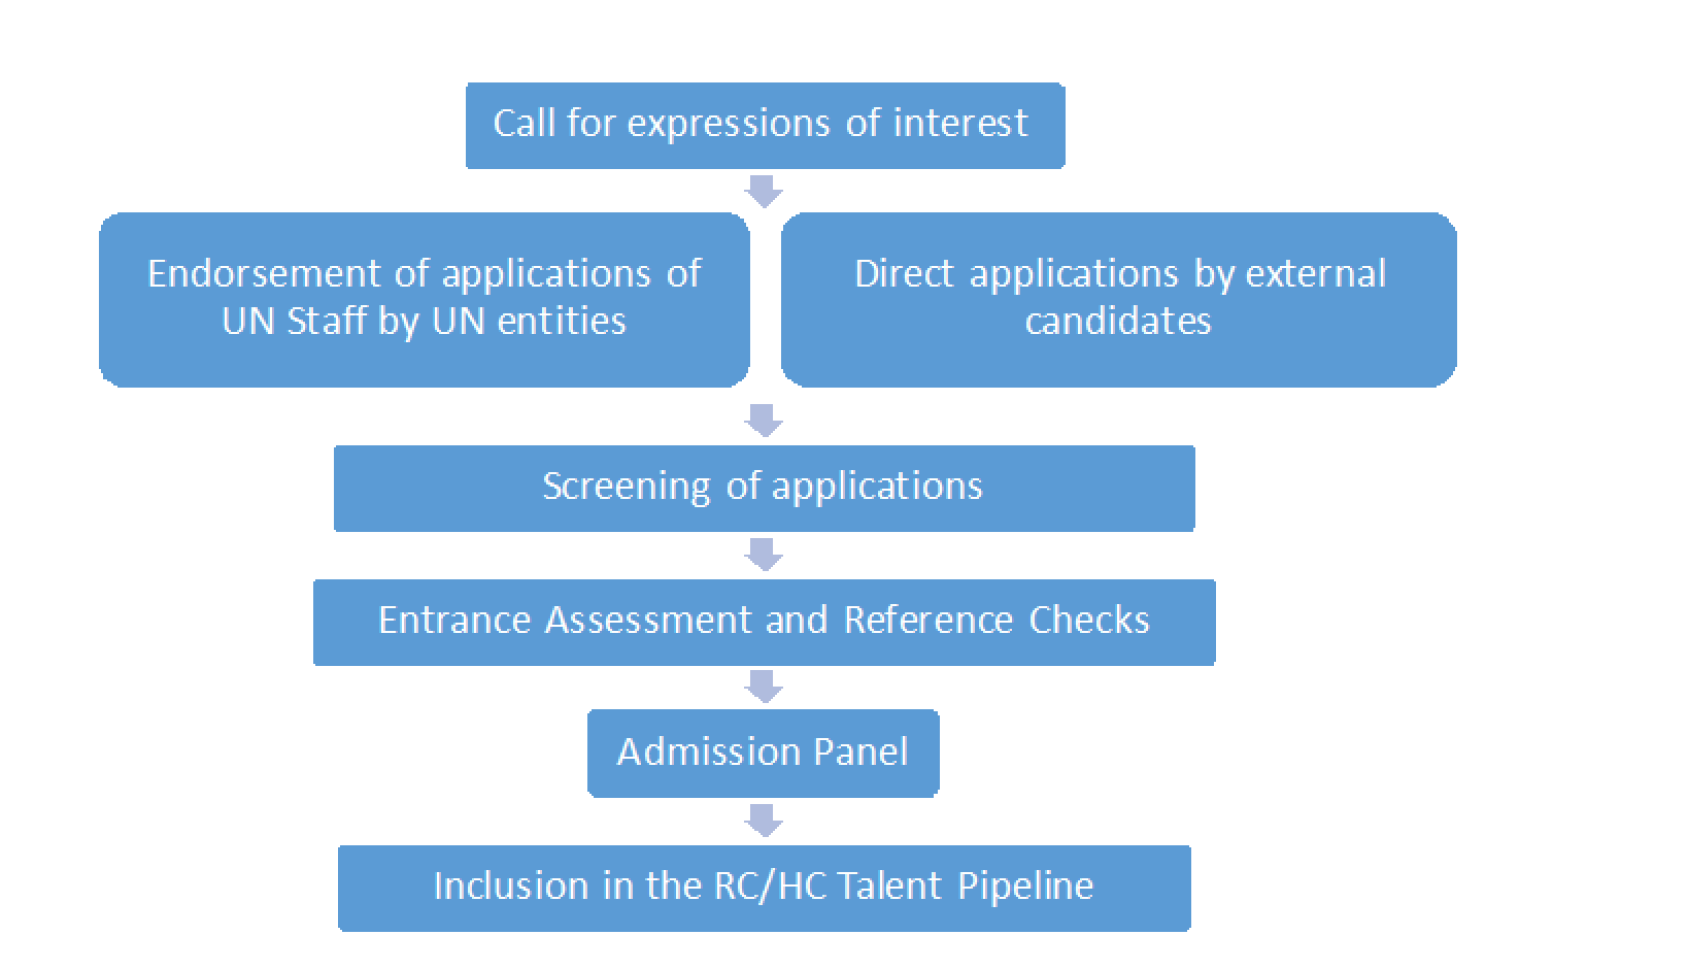 This is a graph that explains the steps from application to the inclusion into the RC/HC Talent Pipeline